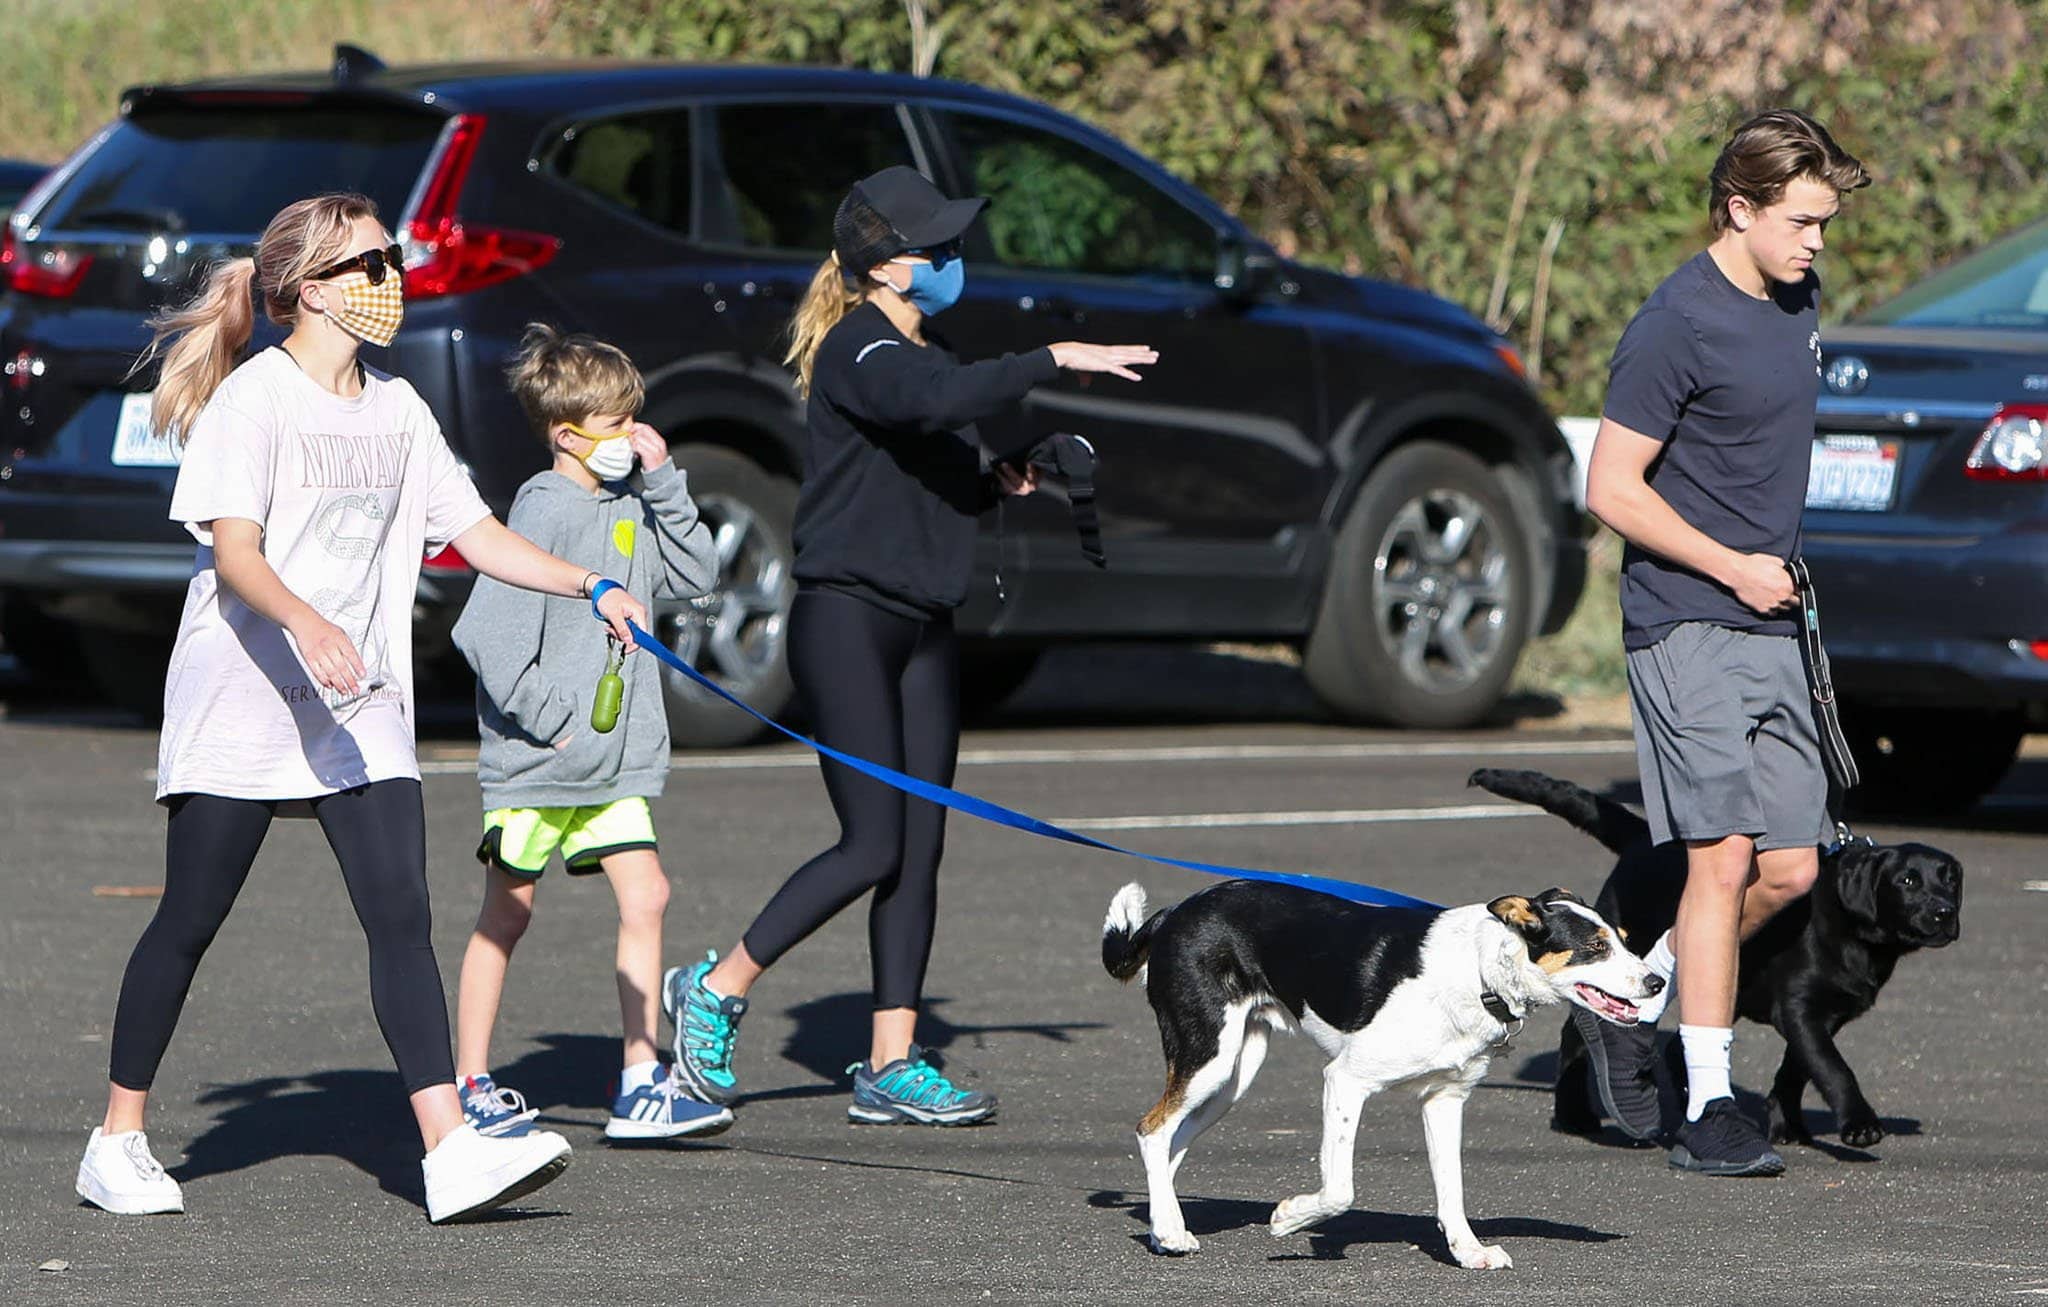 Reese Witherspoon out for a hike with her kids and dogs in Los Angeles on March 19, 2021